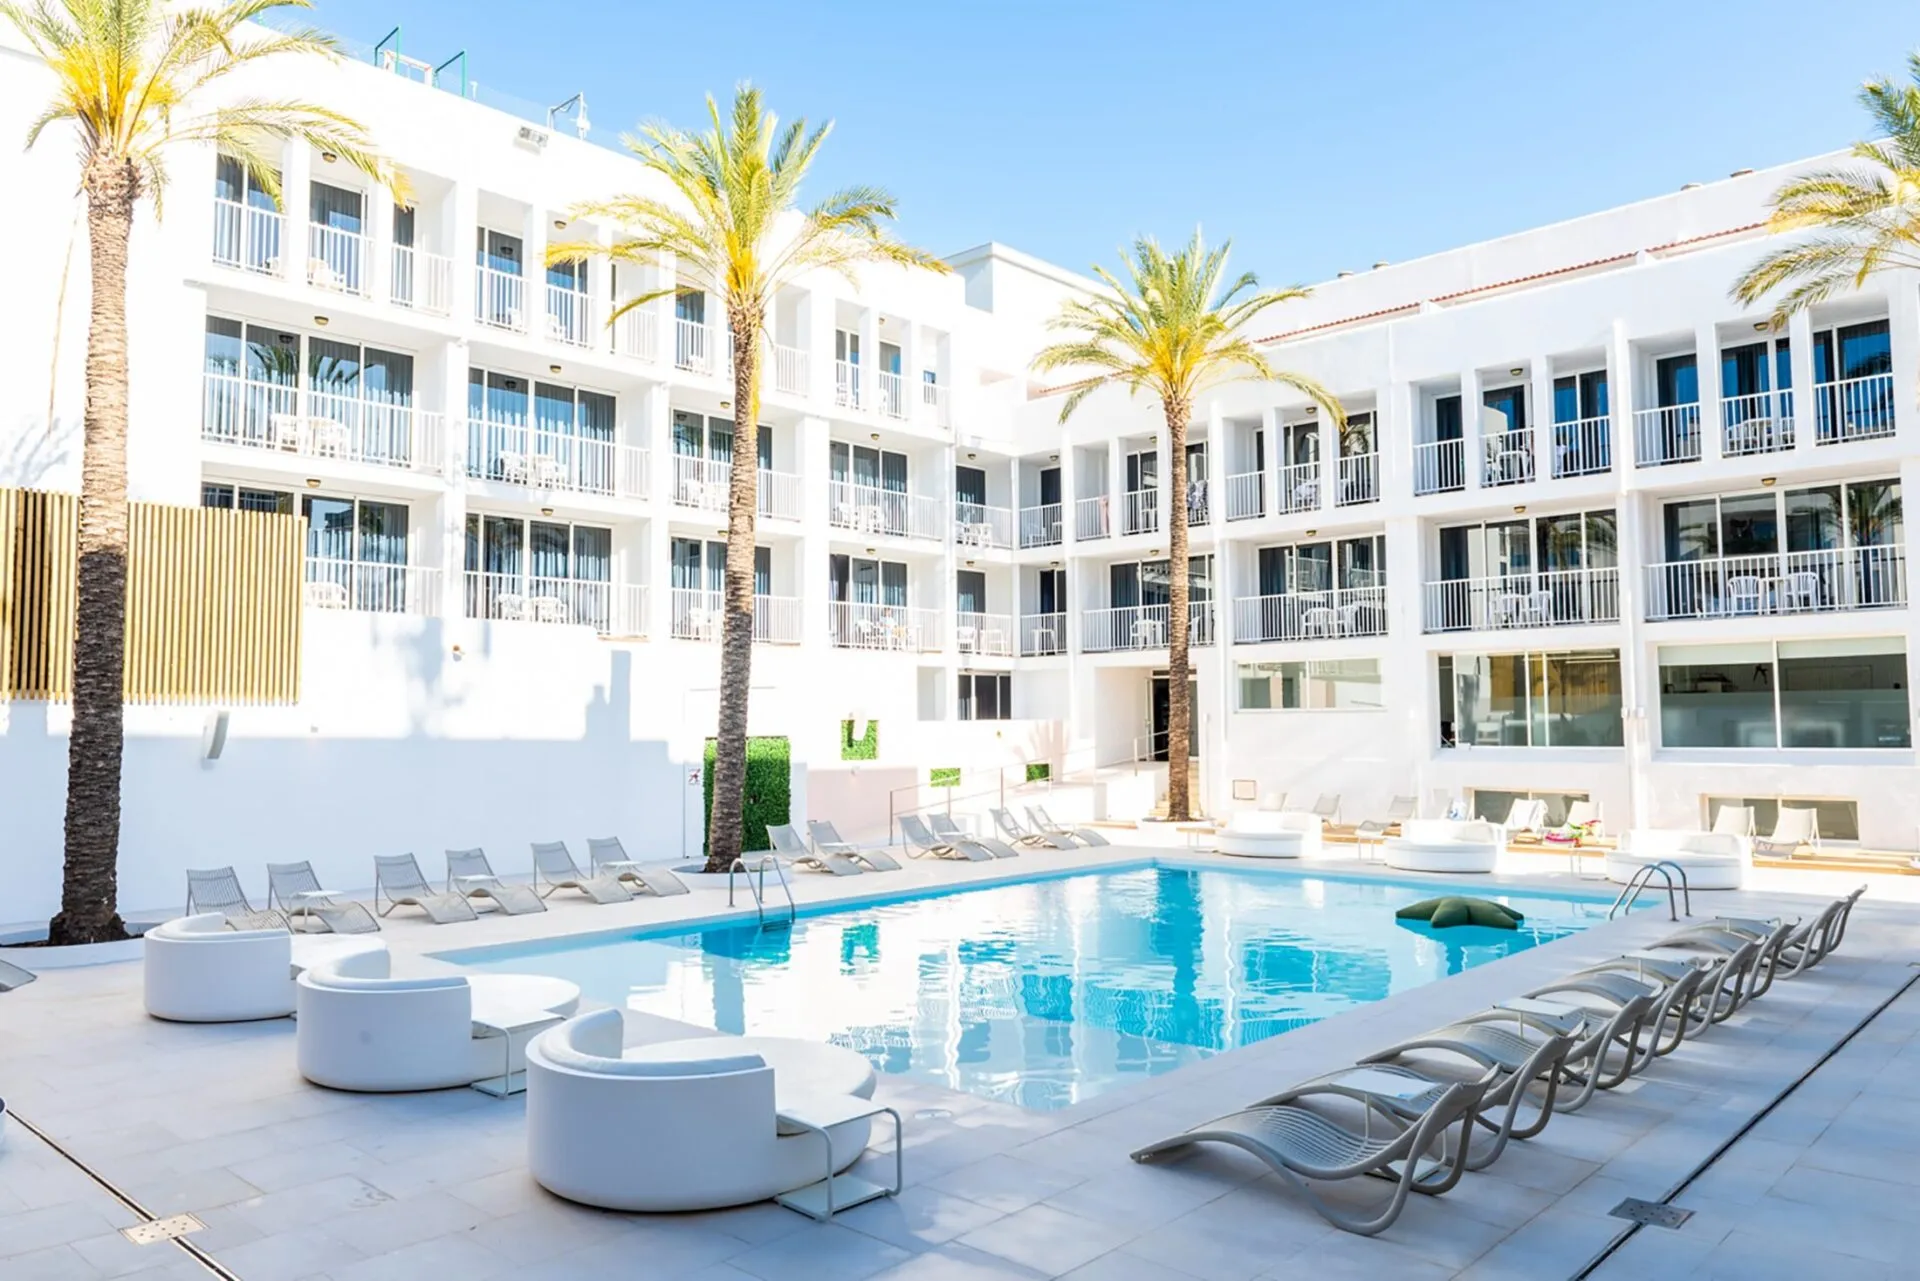 the chill out pool at ibiza rocks hotel with day beds and sunloungers